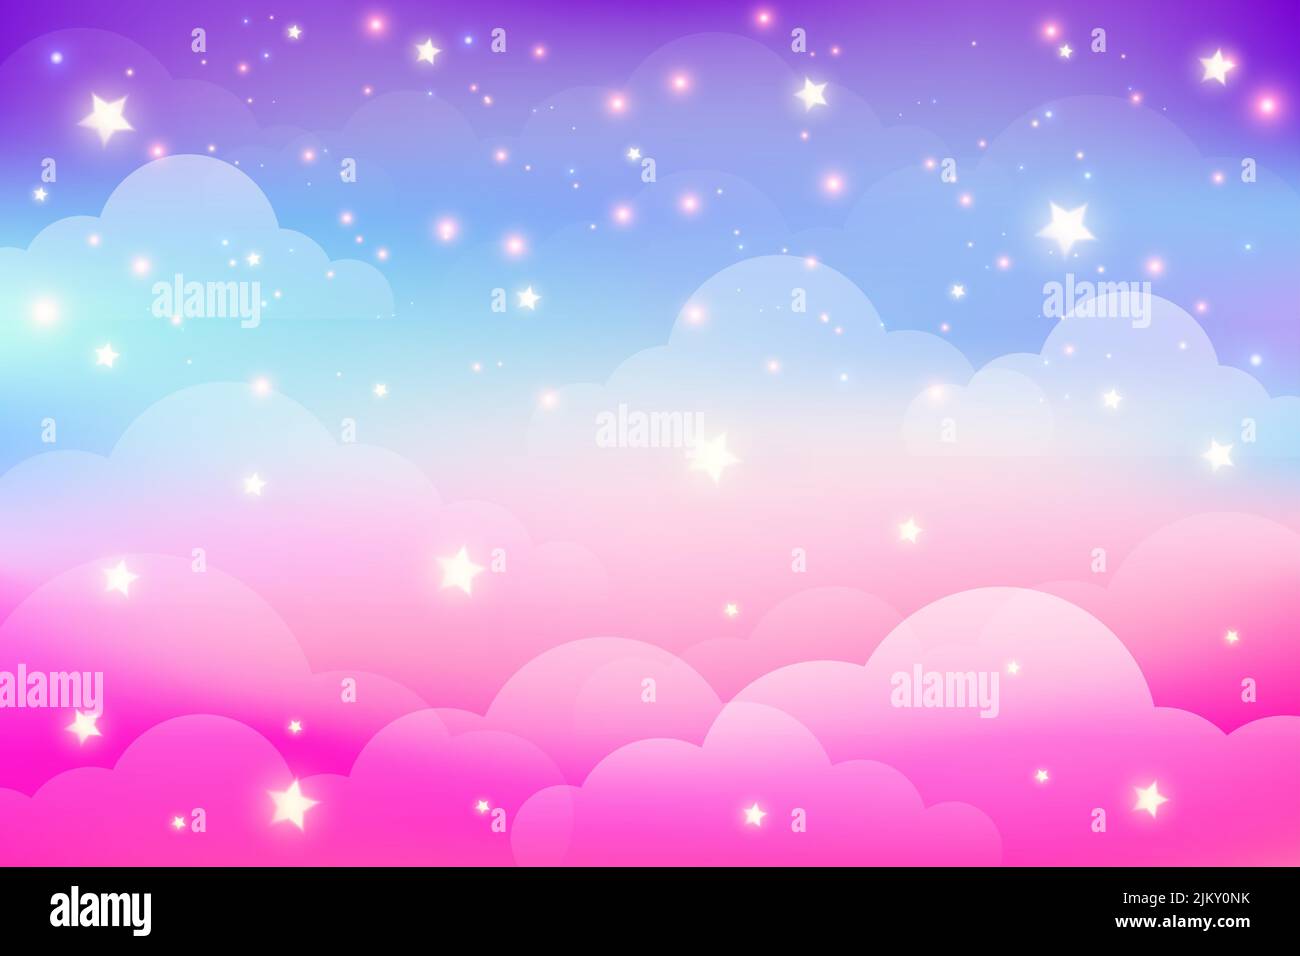 Rainbow unicorn background with clouds and stars. Pastel color sky. Magical landscape, abstract fabulous pattern. Cute candy wallpaper. Vector. Stock Vector